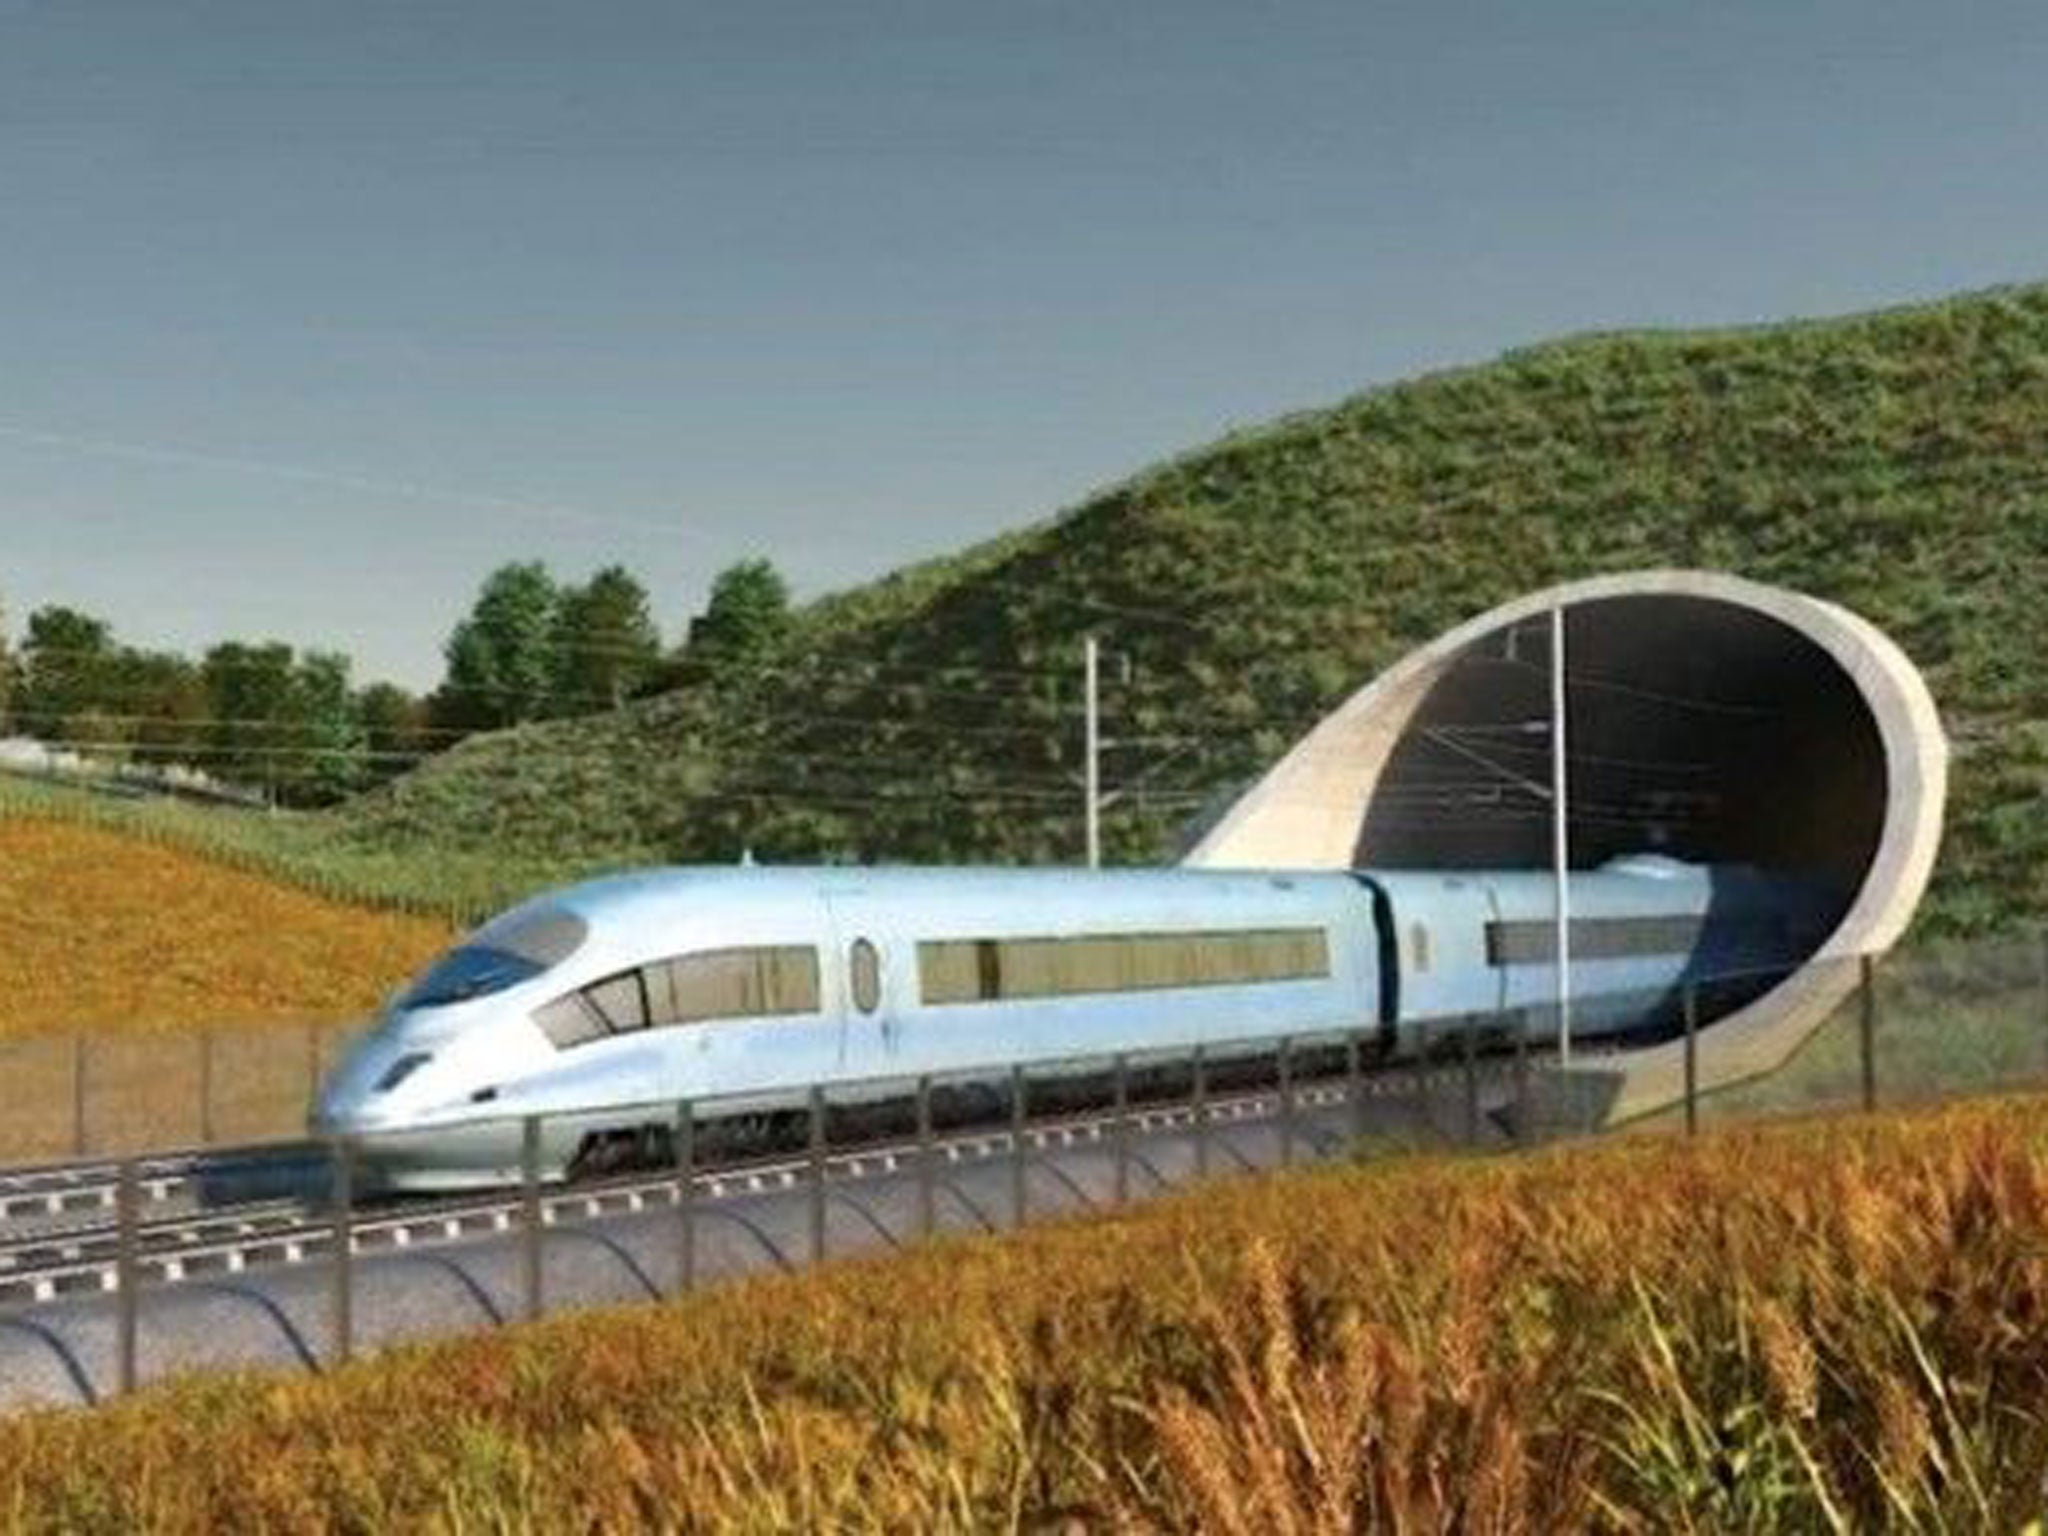 A powerful new lobby group wants ‘wider social benefits’ from the construction of HS2